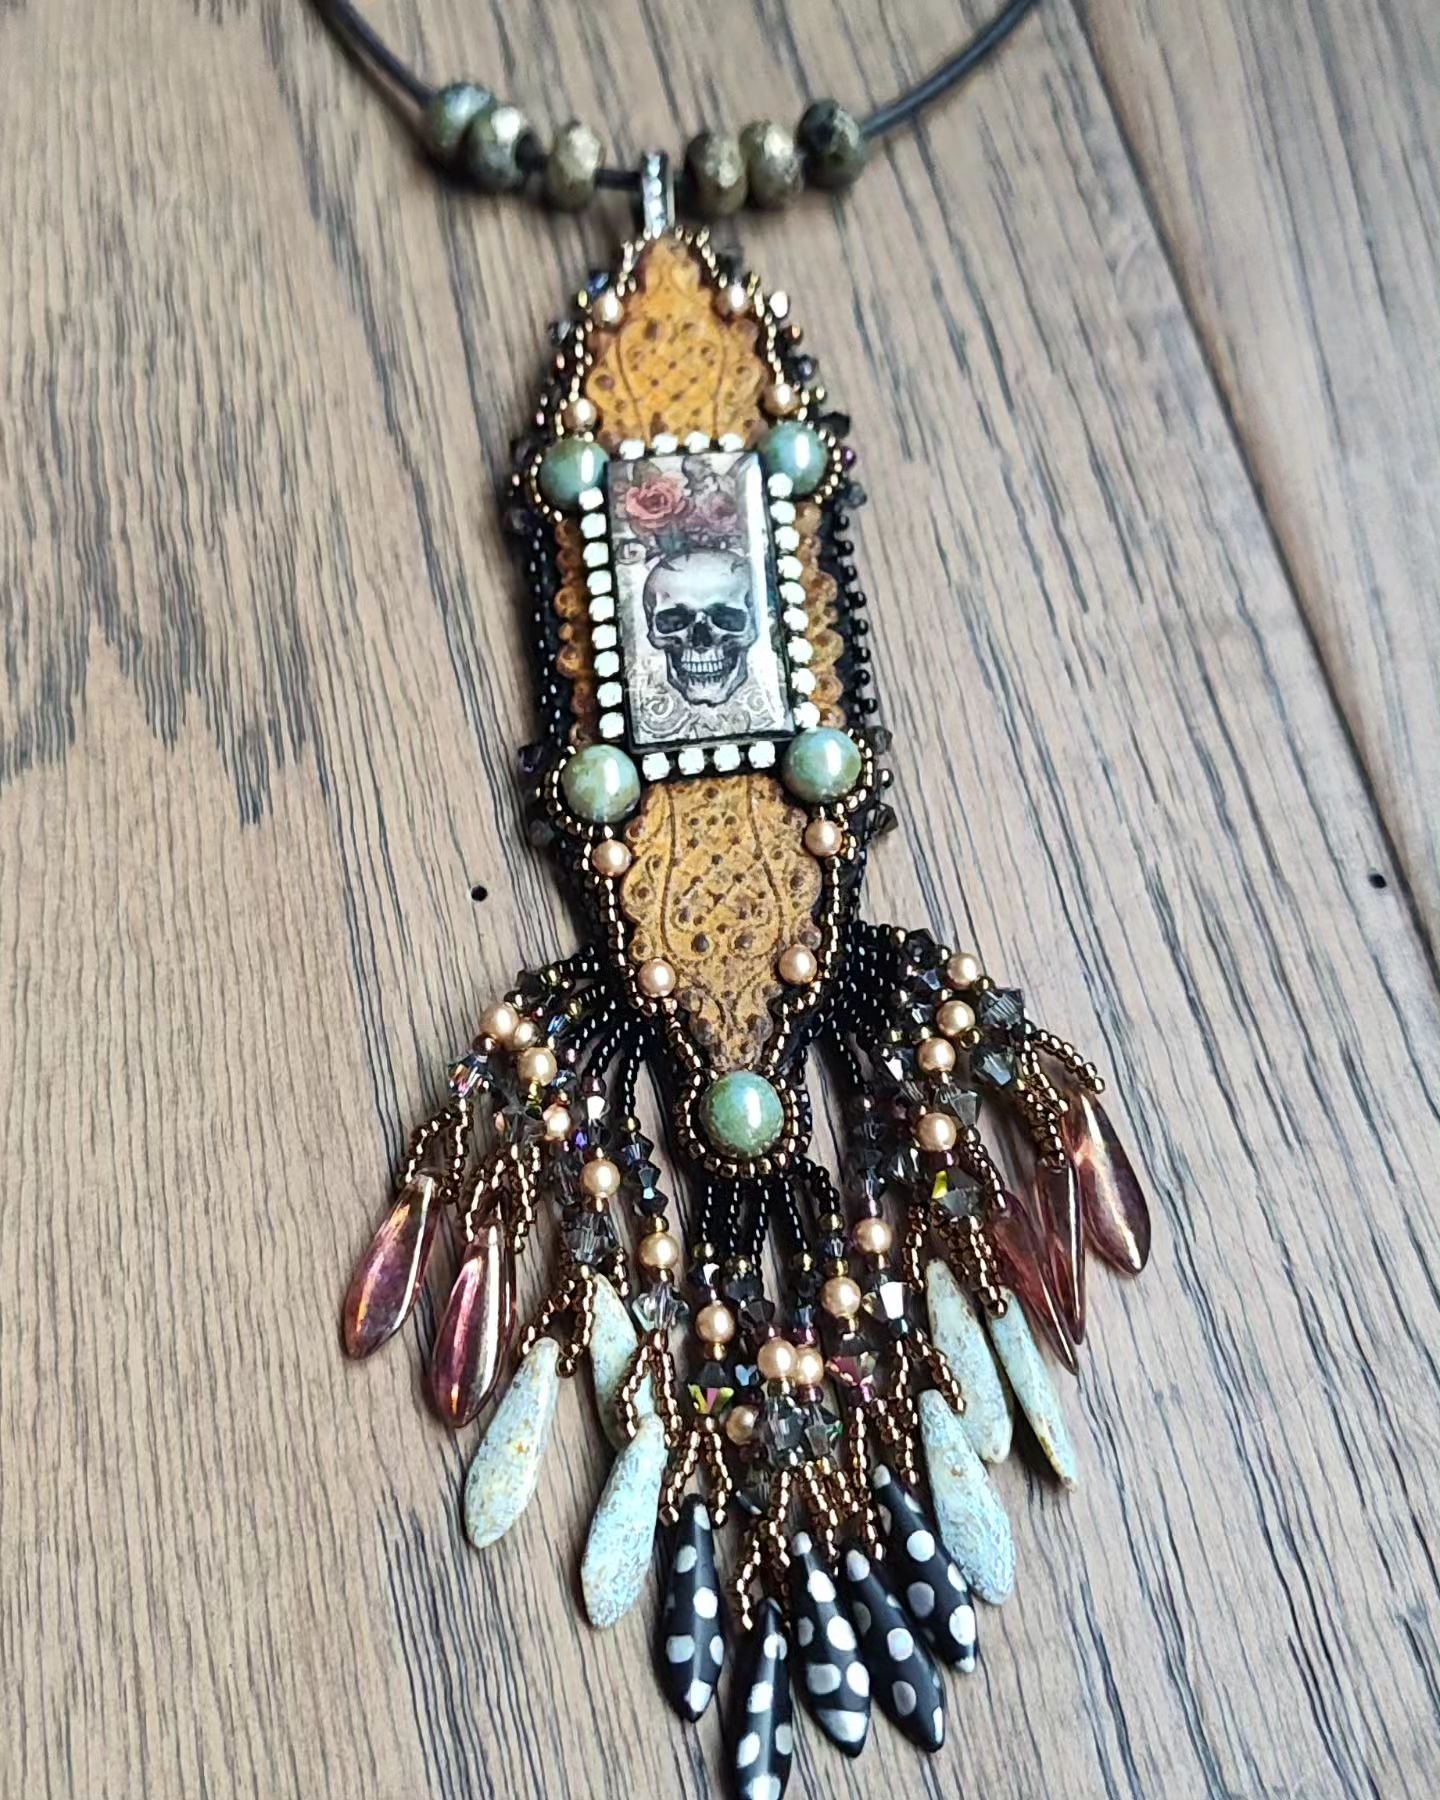 Made yesterday, @sherryserafini kit, Davenport Necklace. I can't wait to wear it!
.
#beadembroideredjewelry #sherryserafini #beadkit #necklacelove